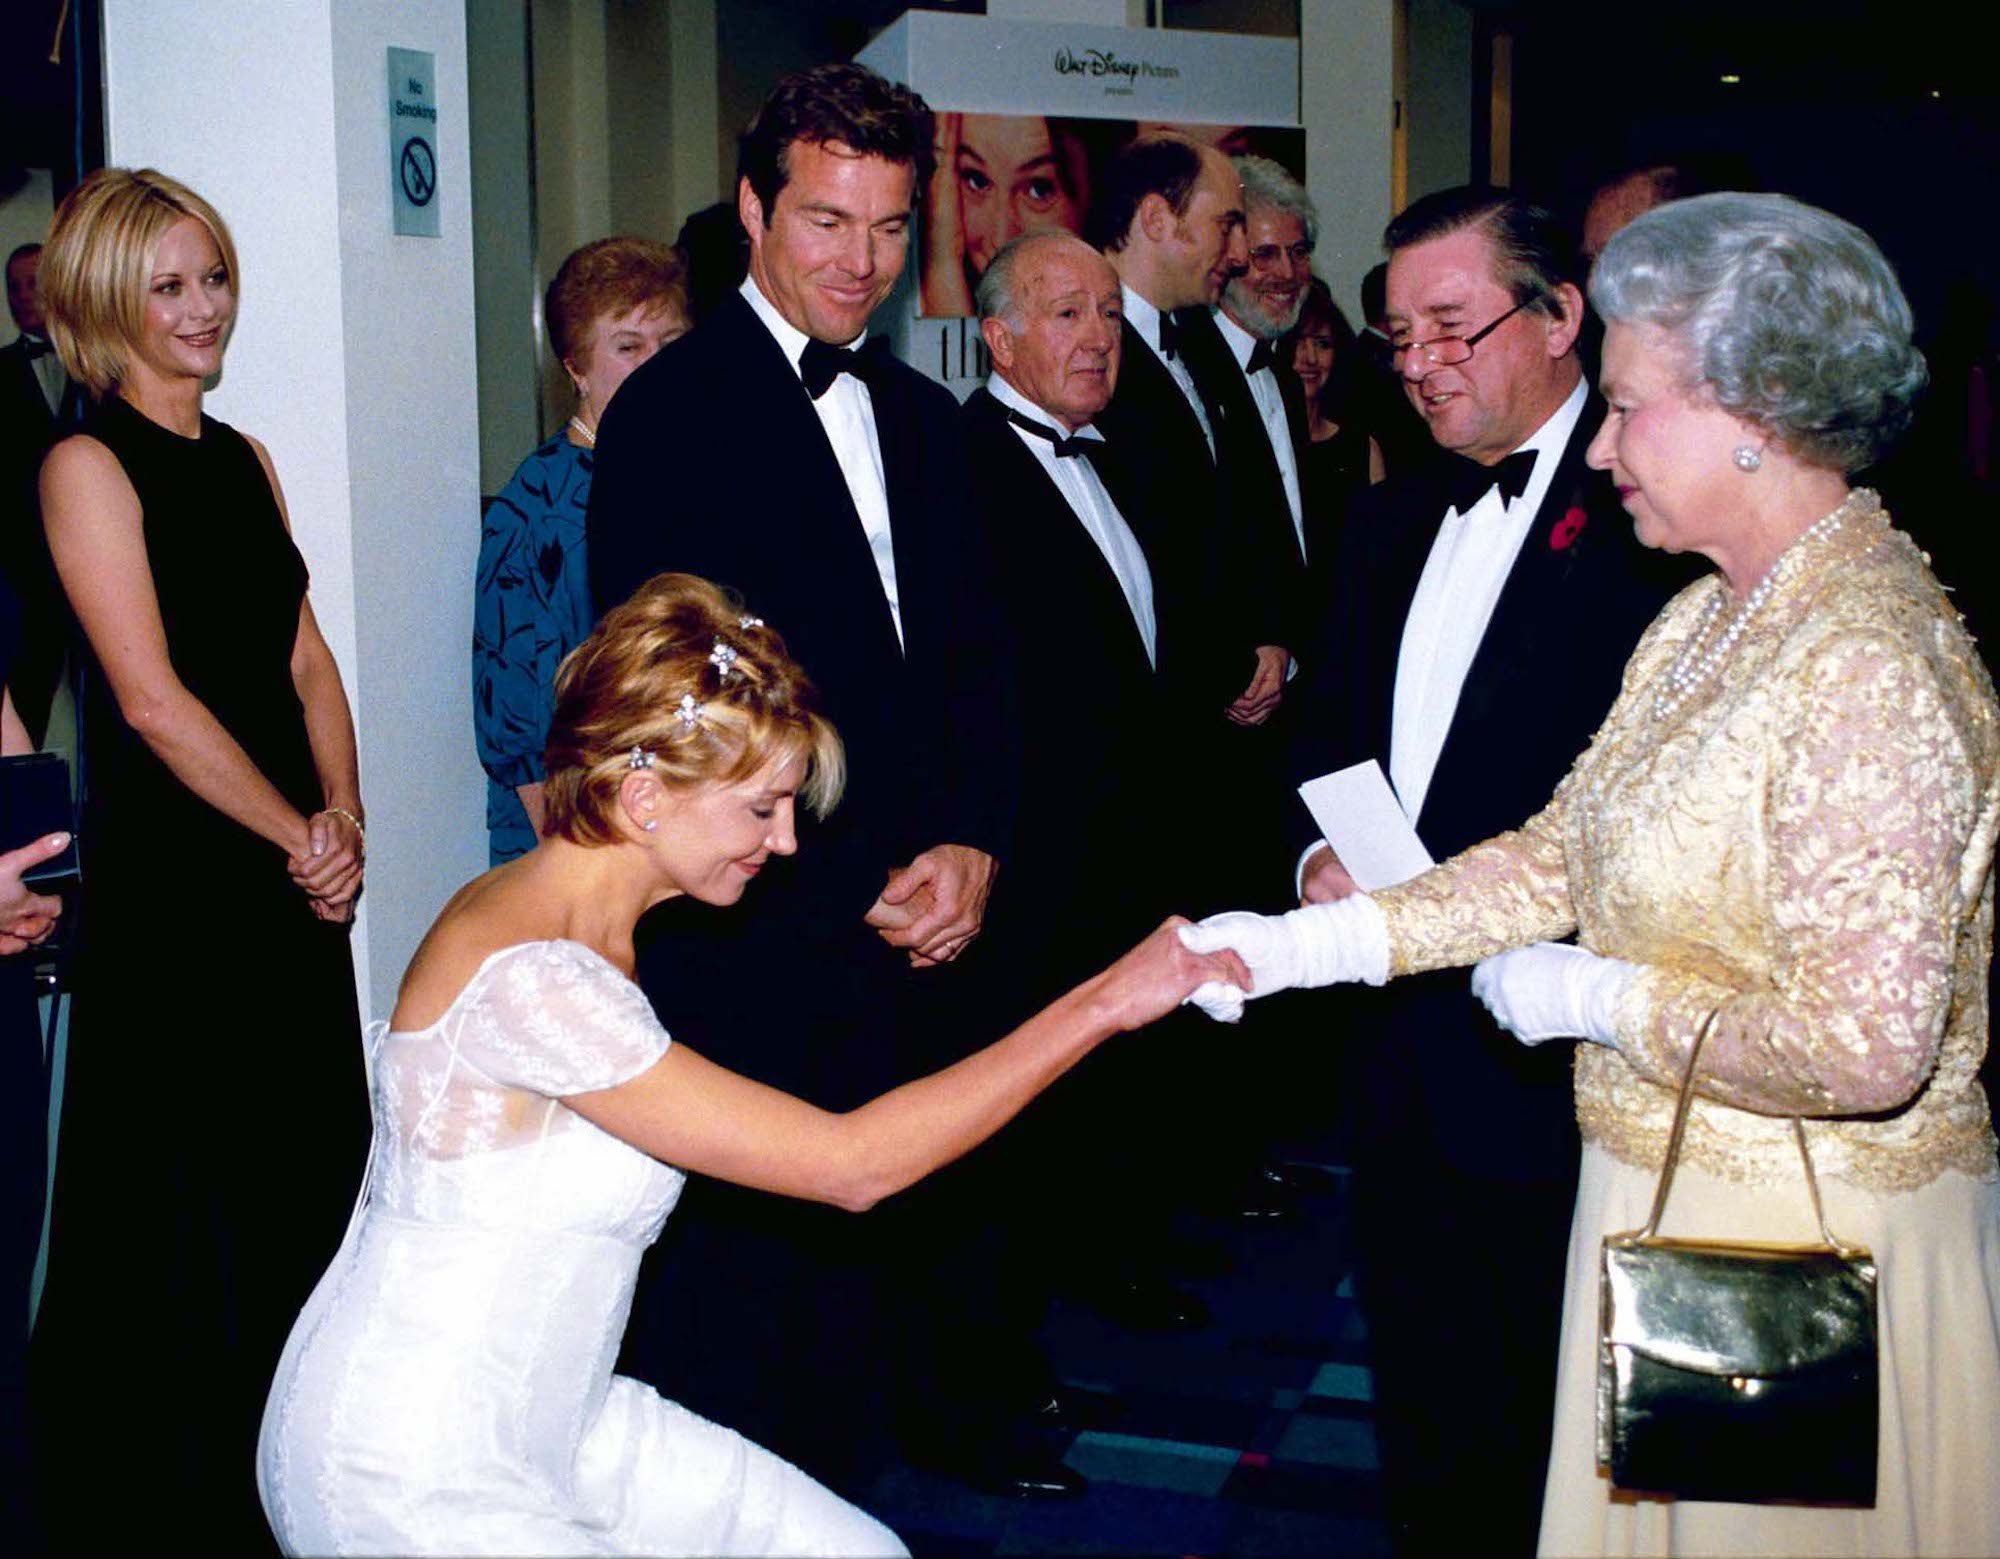 Natasha Richardson curtseying to Queen Elizabeth II at 'The Parent Trap' Premiere